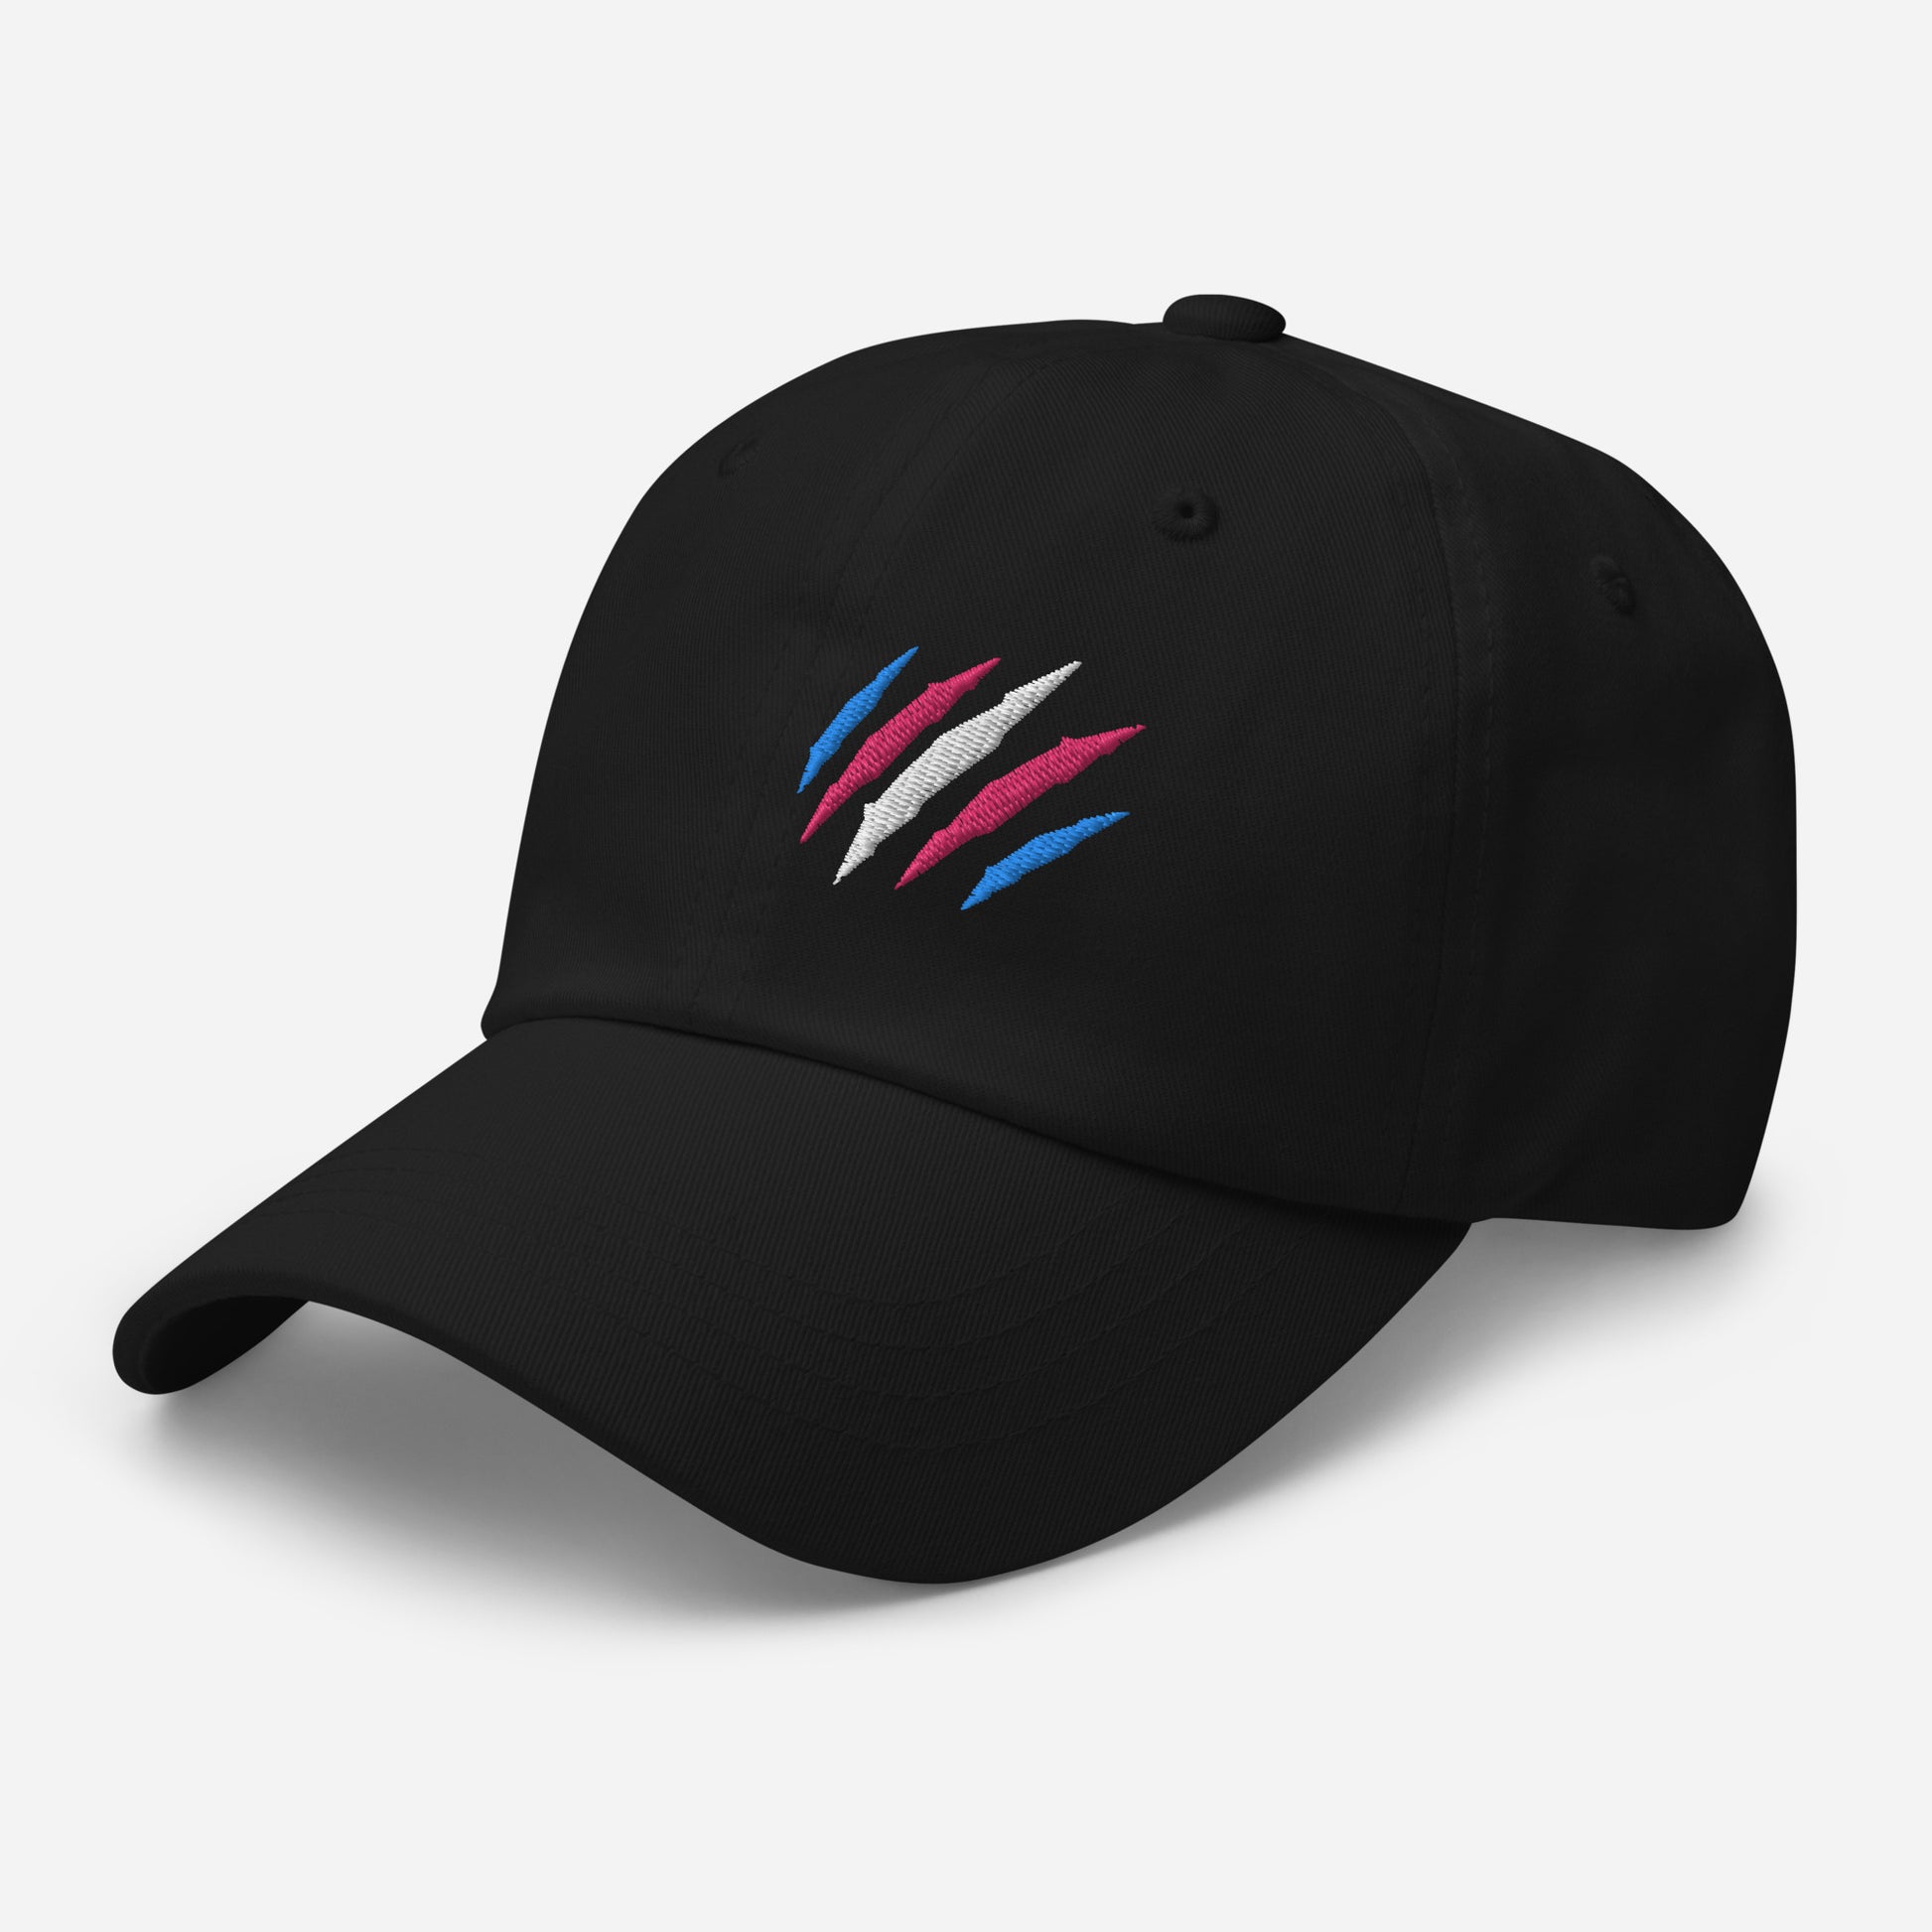 Black baseball hat featuring transgender pride scratch mark embroidery with a low profile, adjustable strap.